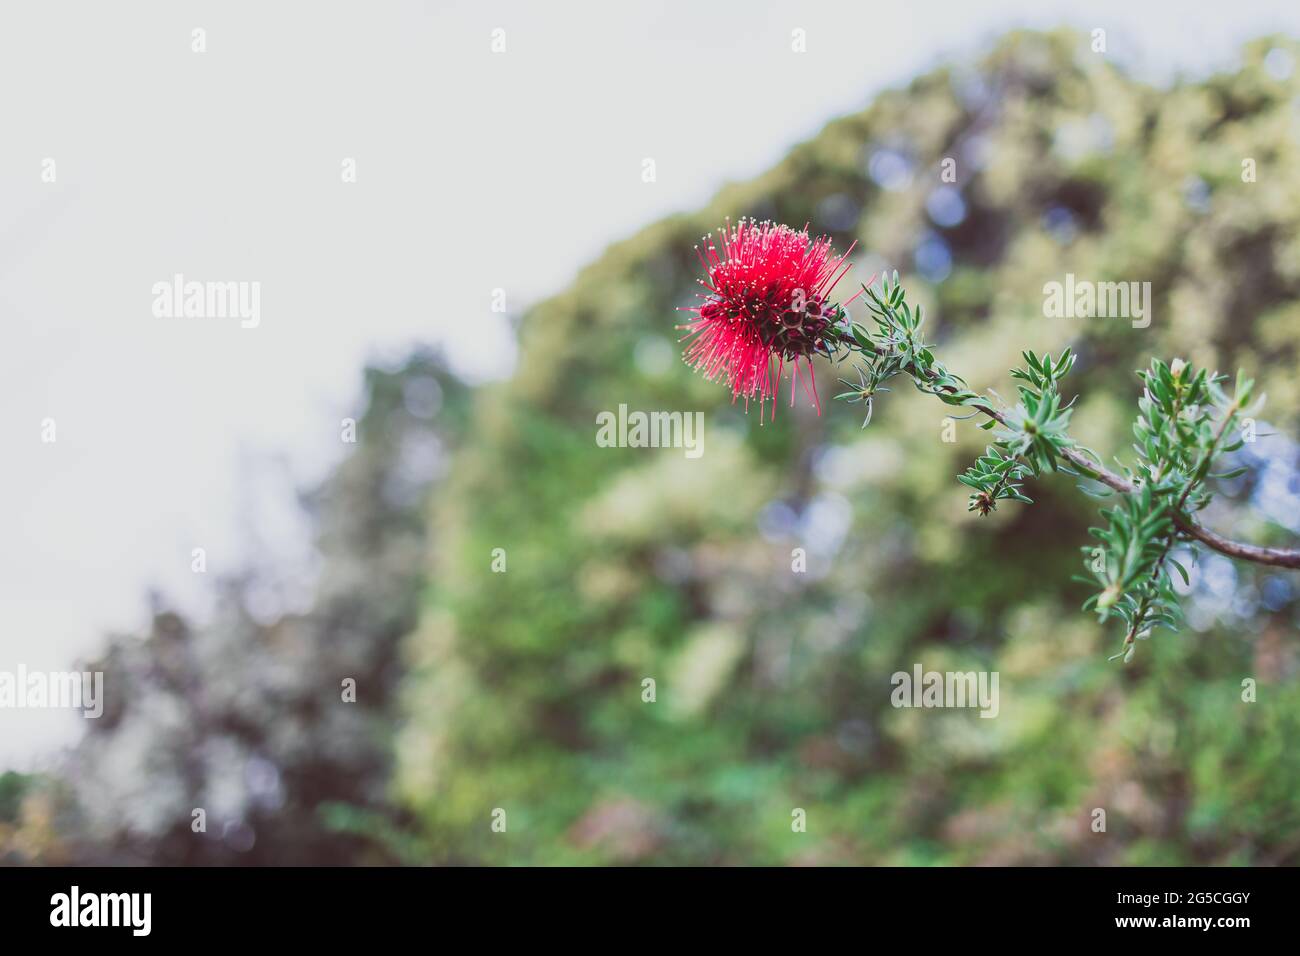 native Australian kunzea plant with red flower outdoor in sunny backyard shot at shallow depth of field Stock Photo